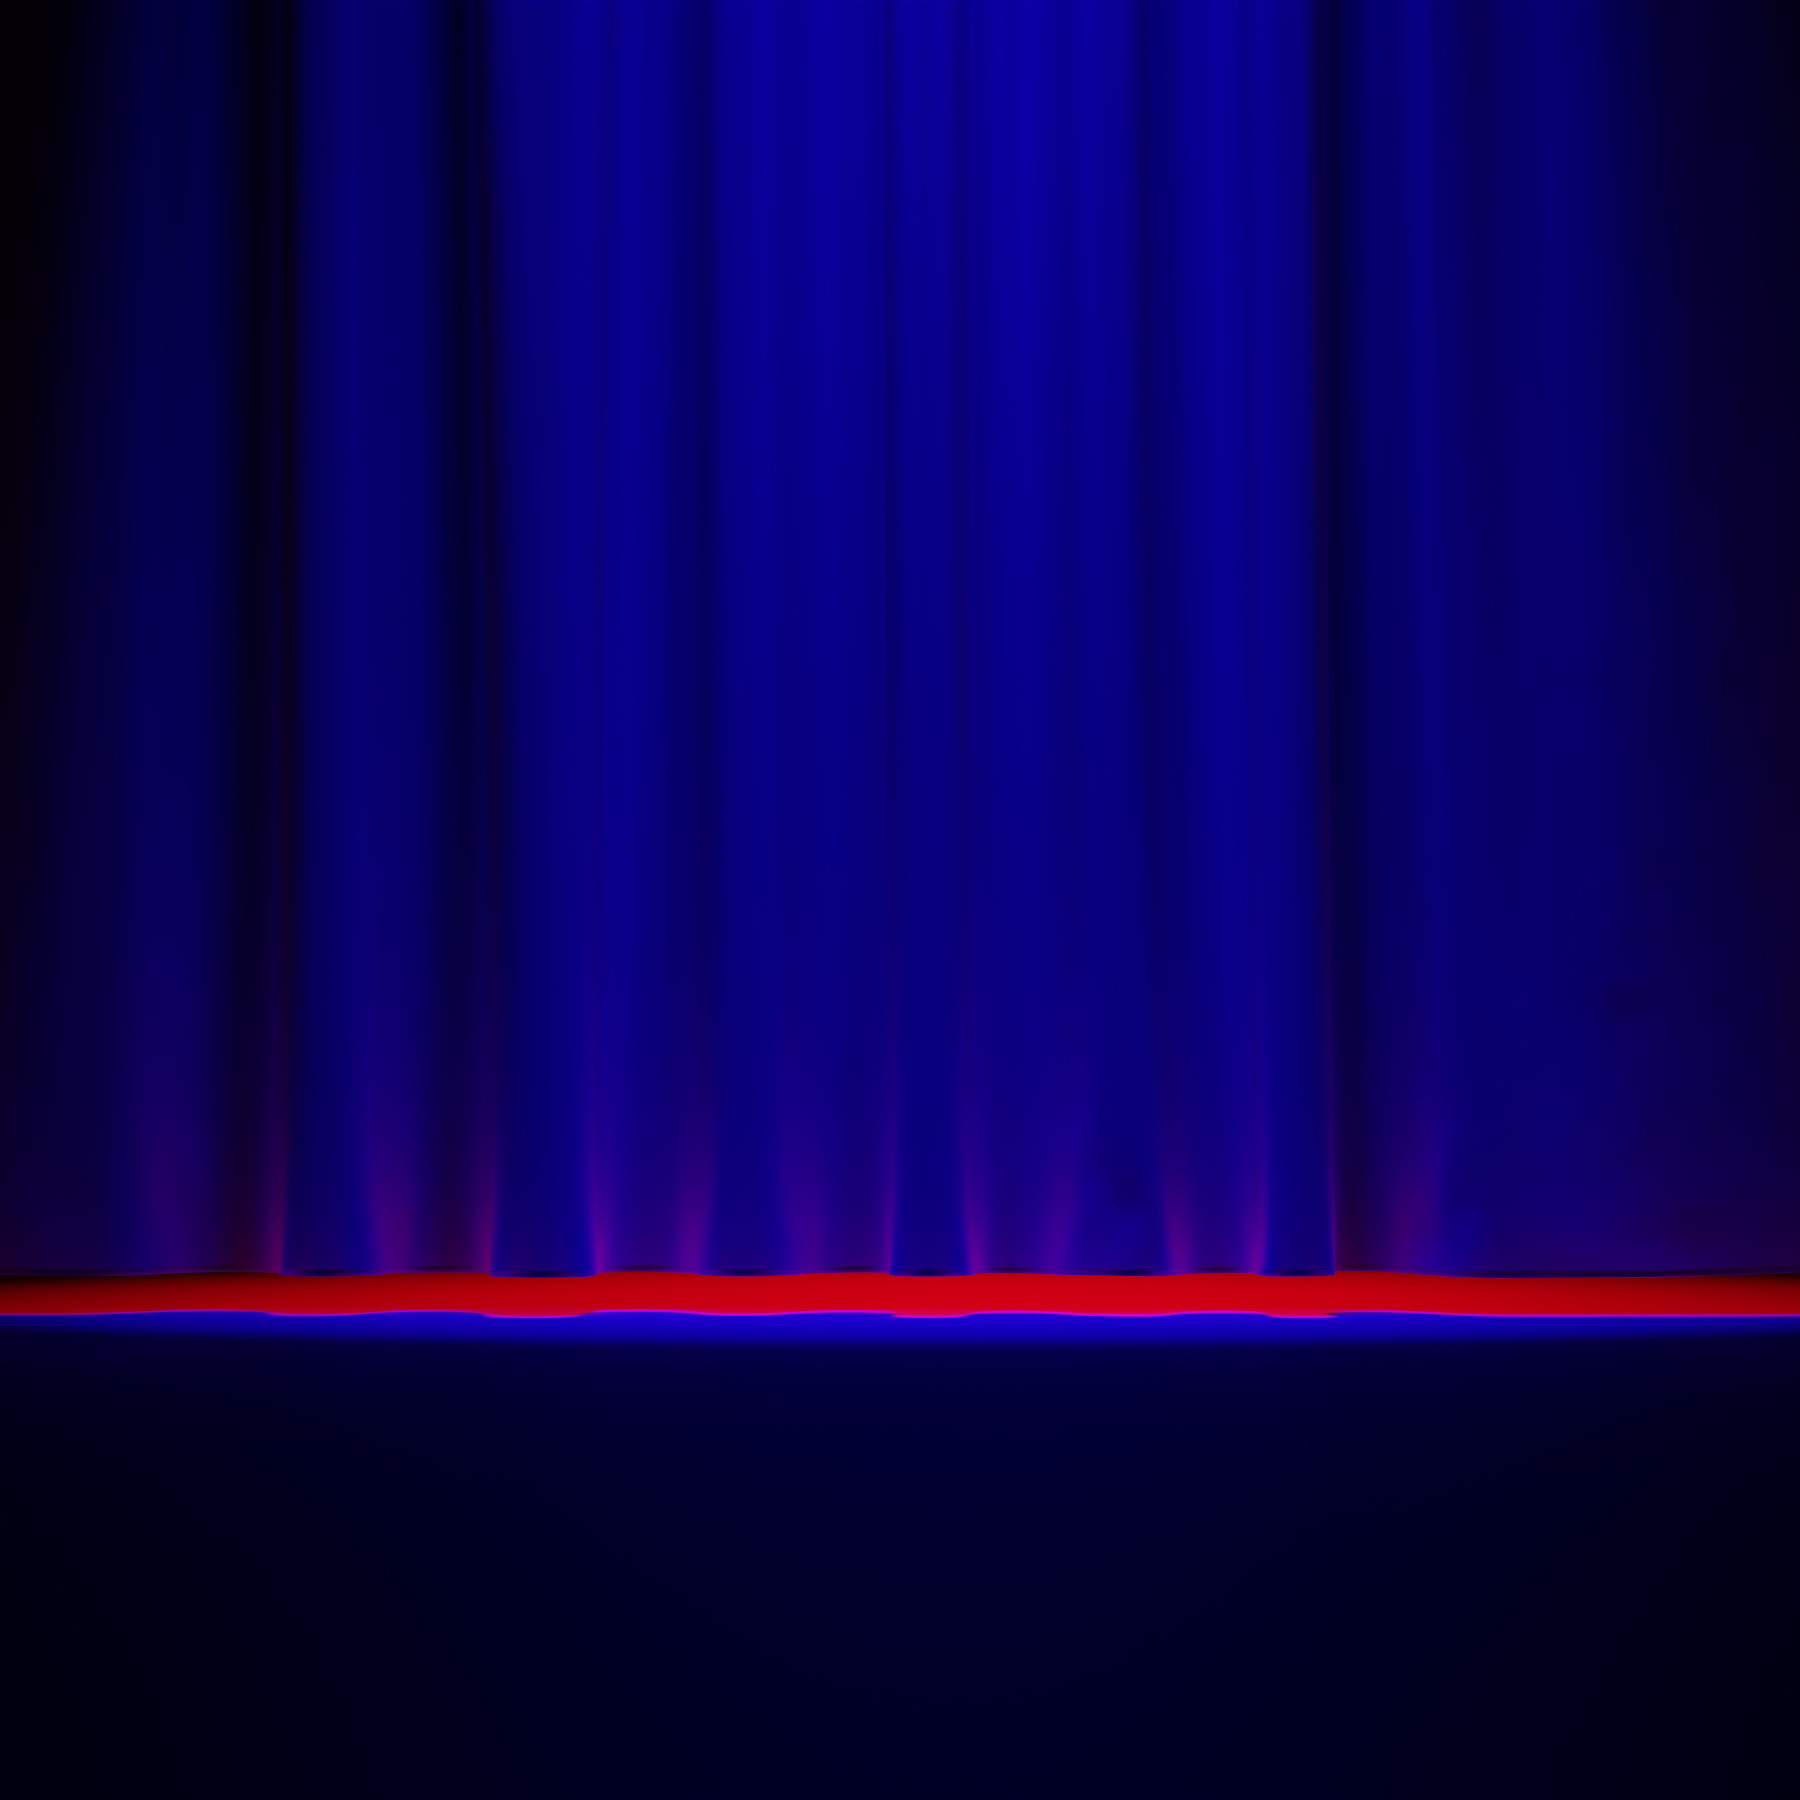 Virtual abstract scenery, Abstract digital art, Raytracing, Computer-rendered image, 2022. The scene is like sitting in a theater in front of a blue illuminated, still closed curtain. A strong red light shining through the gap between curtain and stage indicates that something will happen soon.